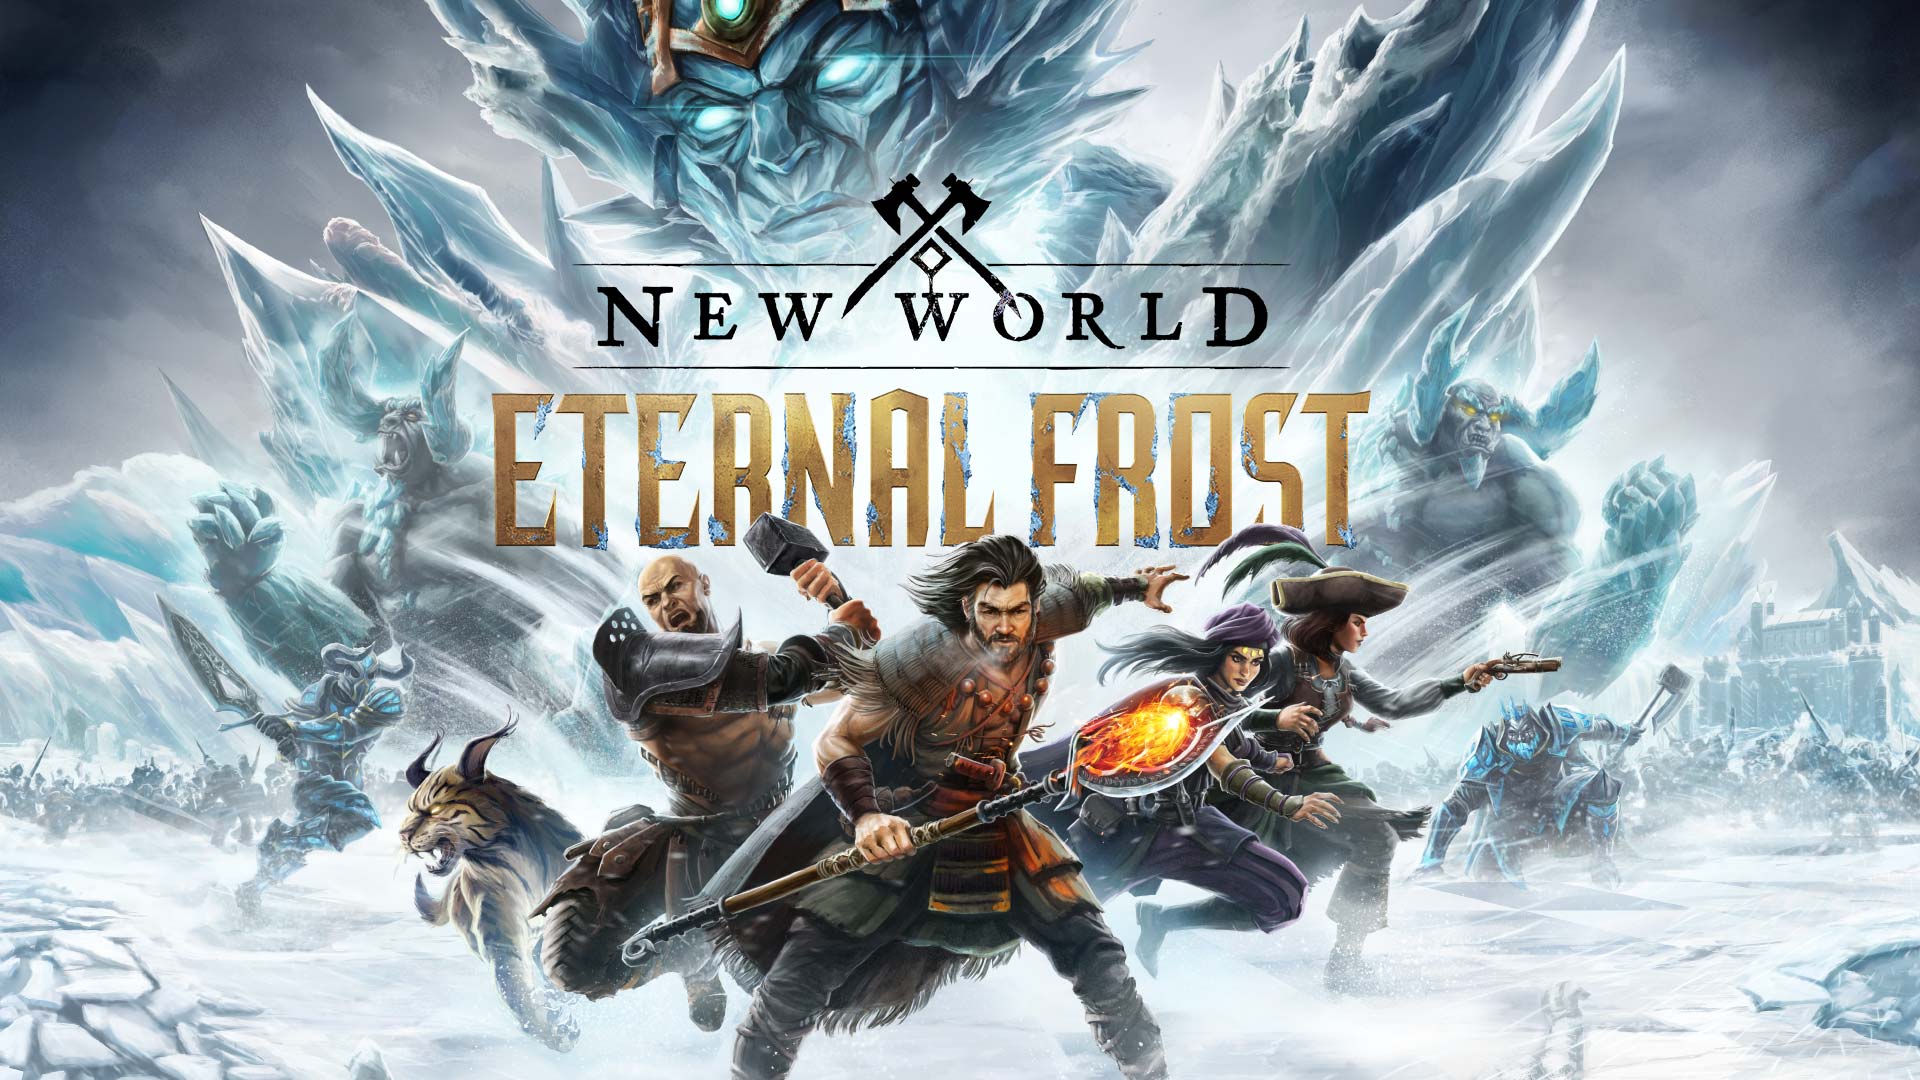 Eternal Frost - News | New World - Open World MMO PC Game